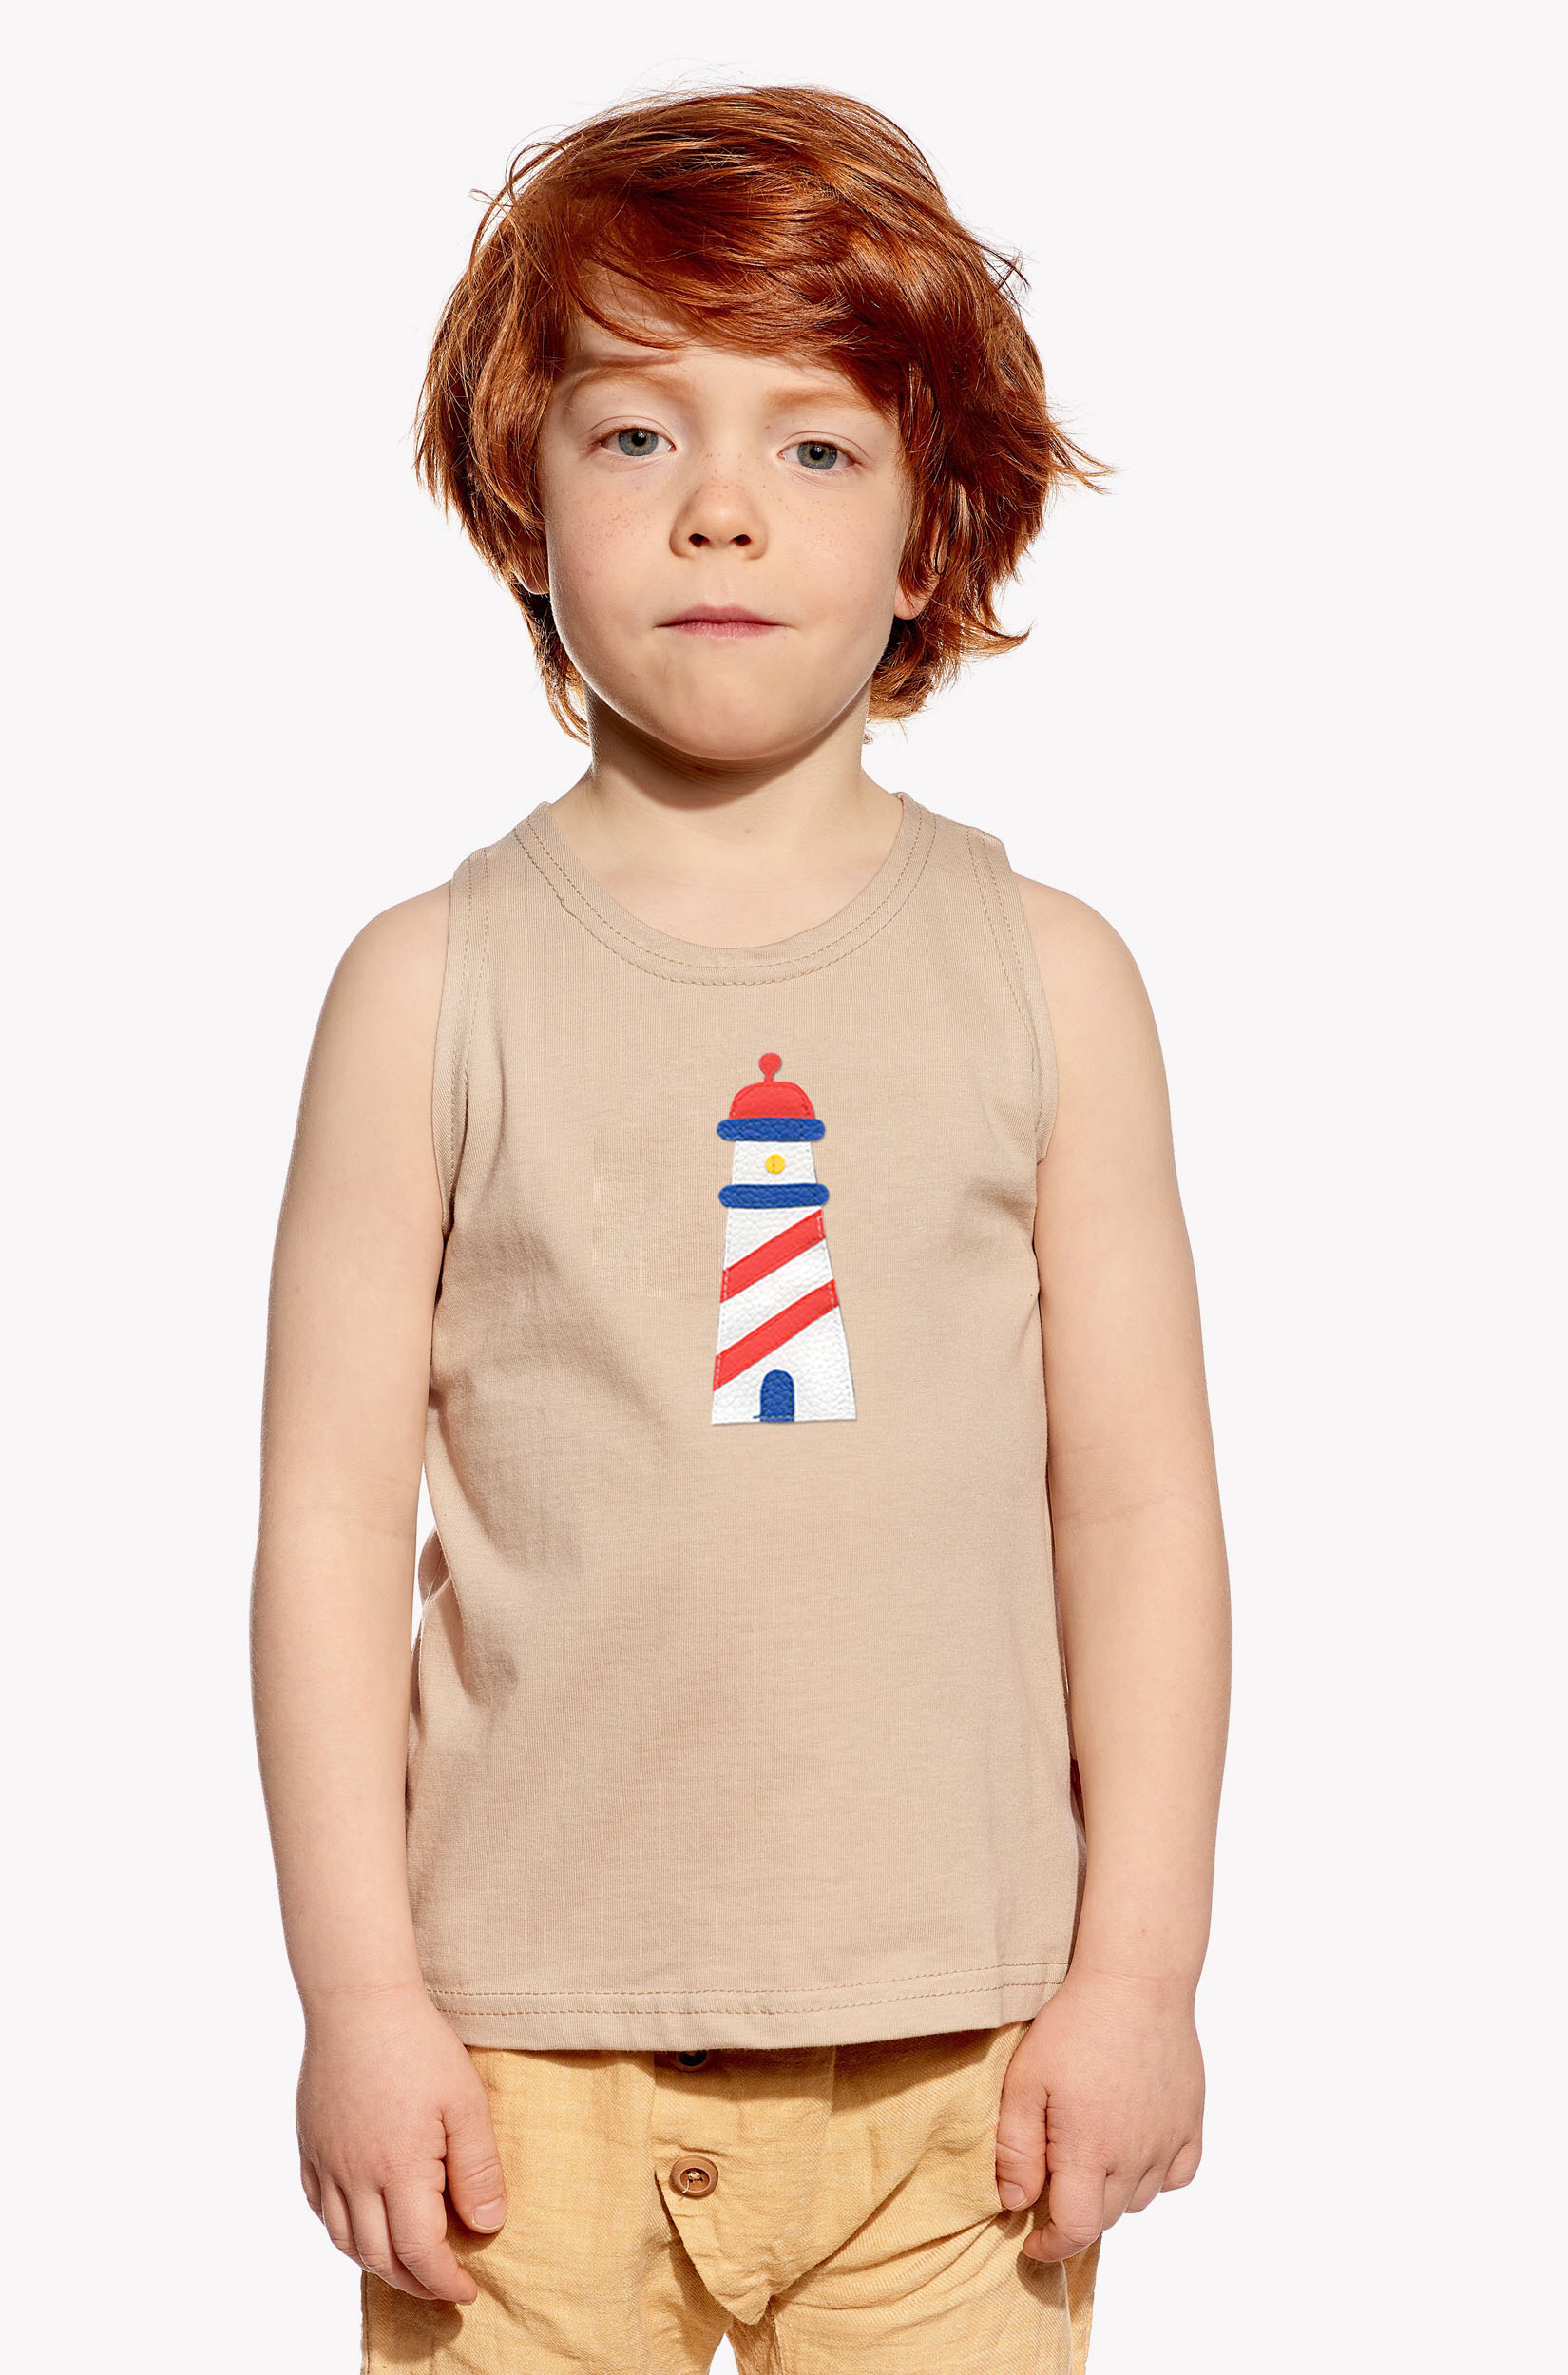 Singlet with lighthouse